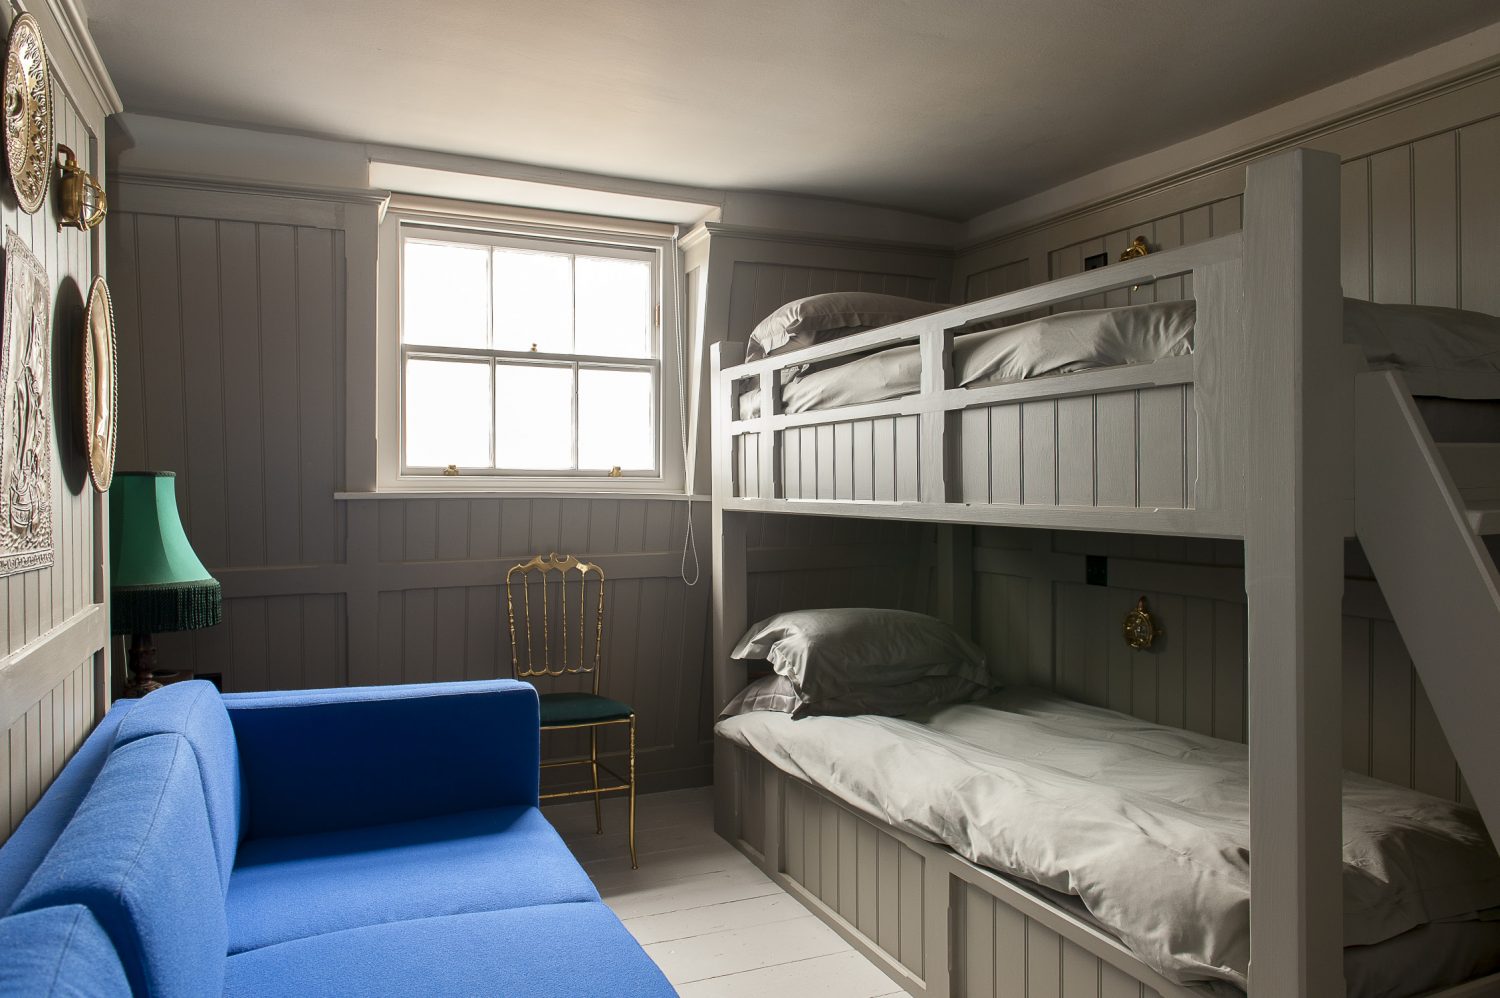 The Crow’s Nest’s bunk bed den features a wall of pressed brass plates